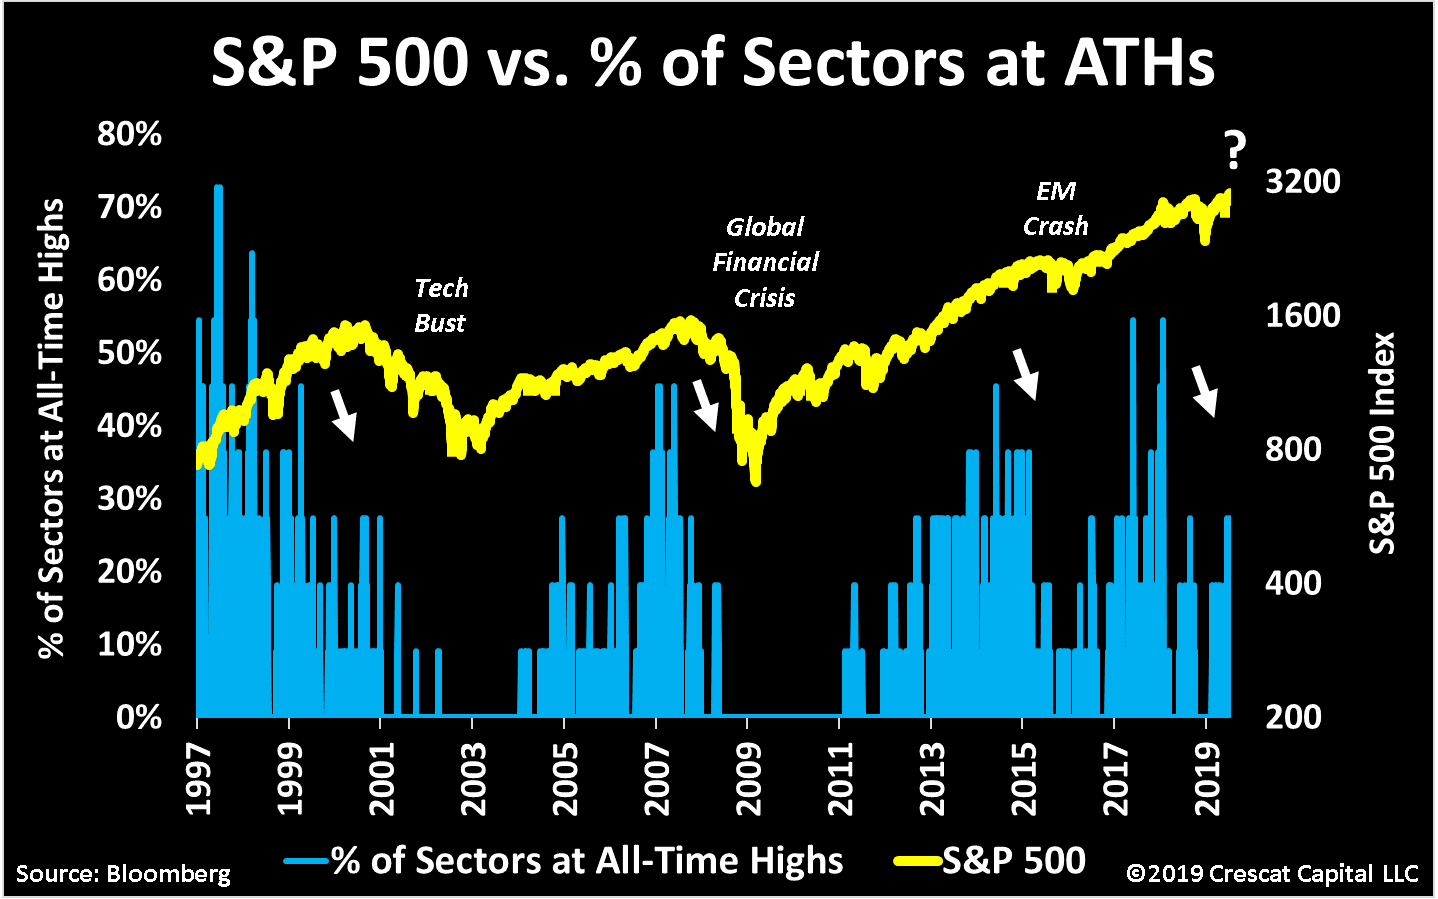 S&P 500 vs. Percentage of Sectors at All-Time Highs